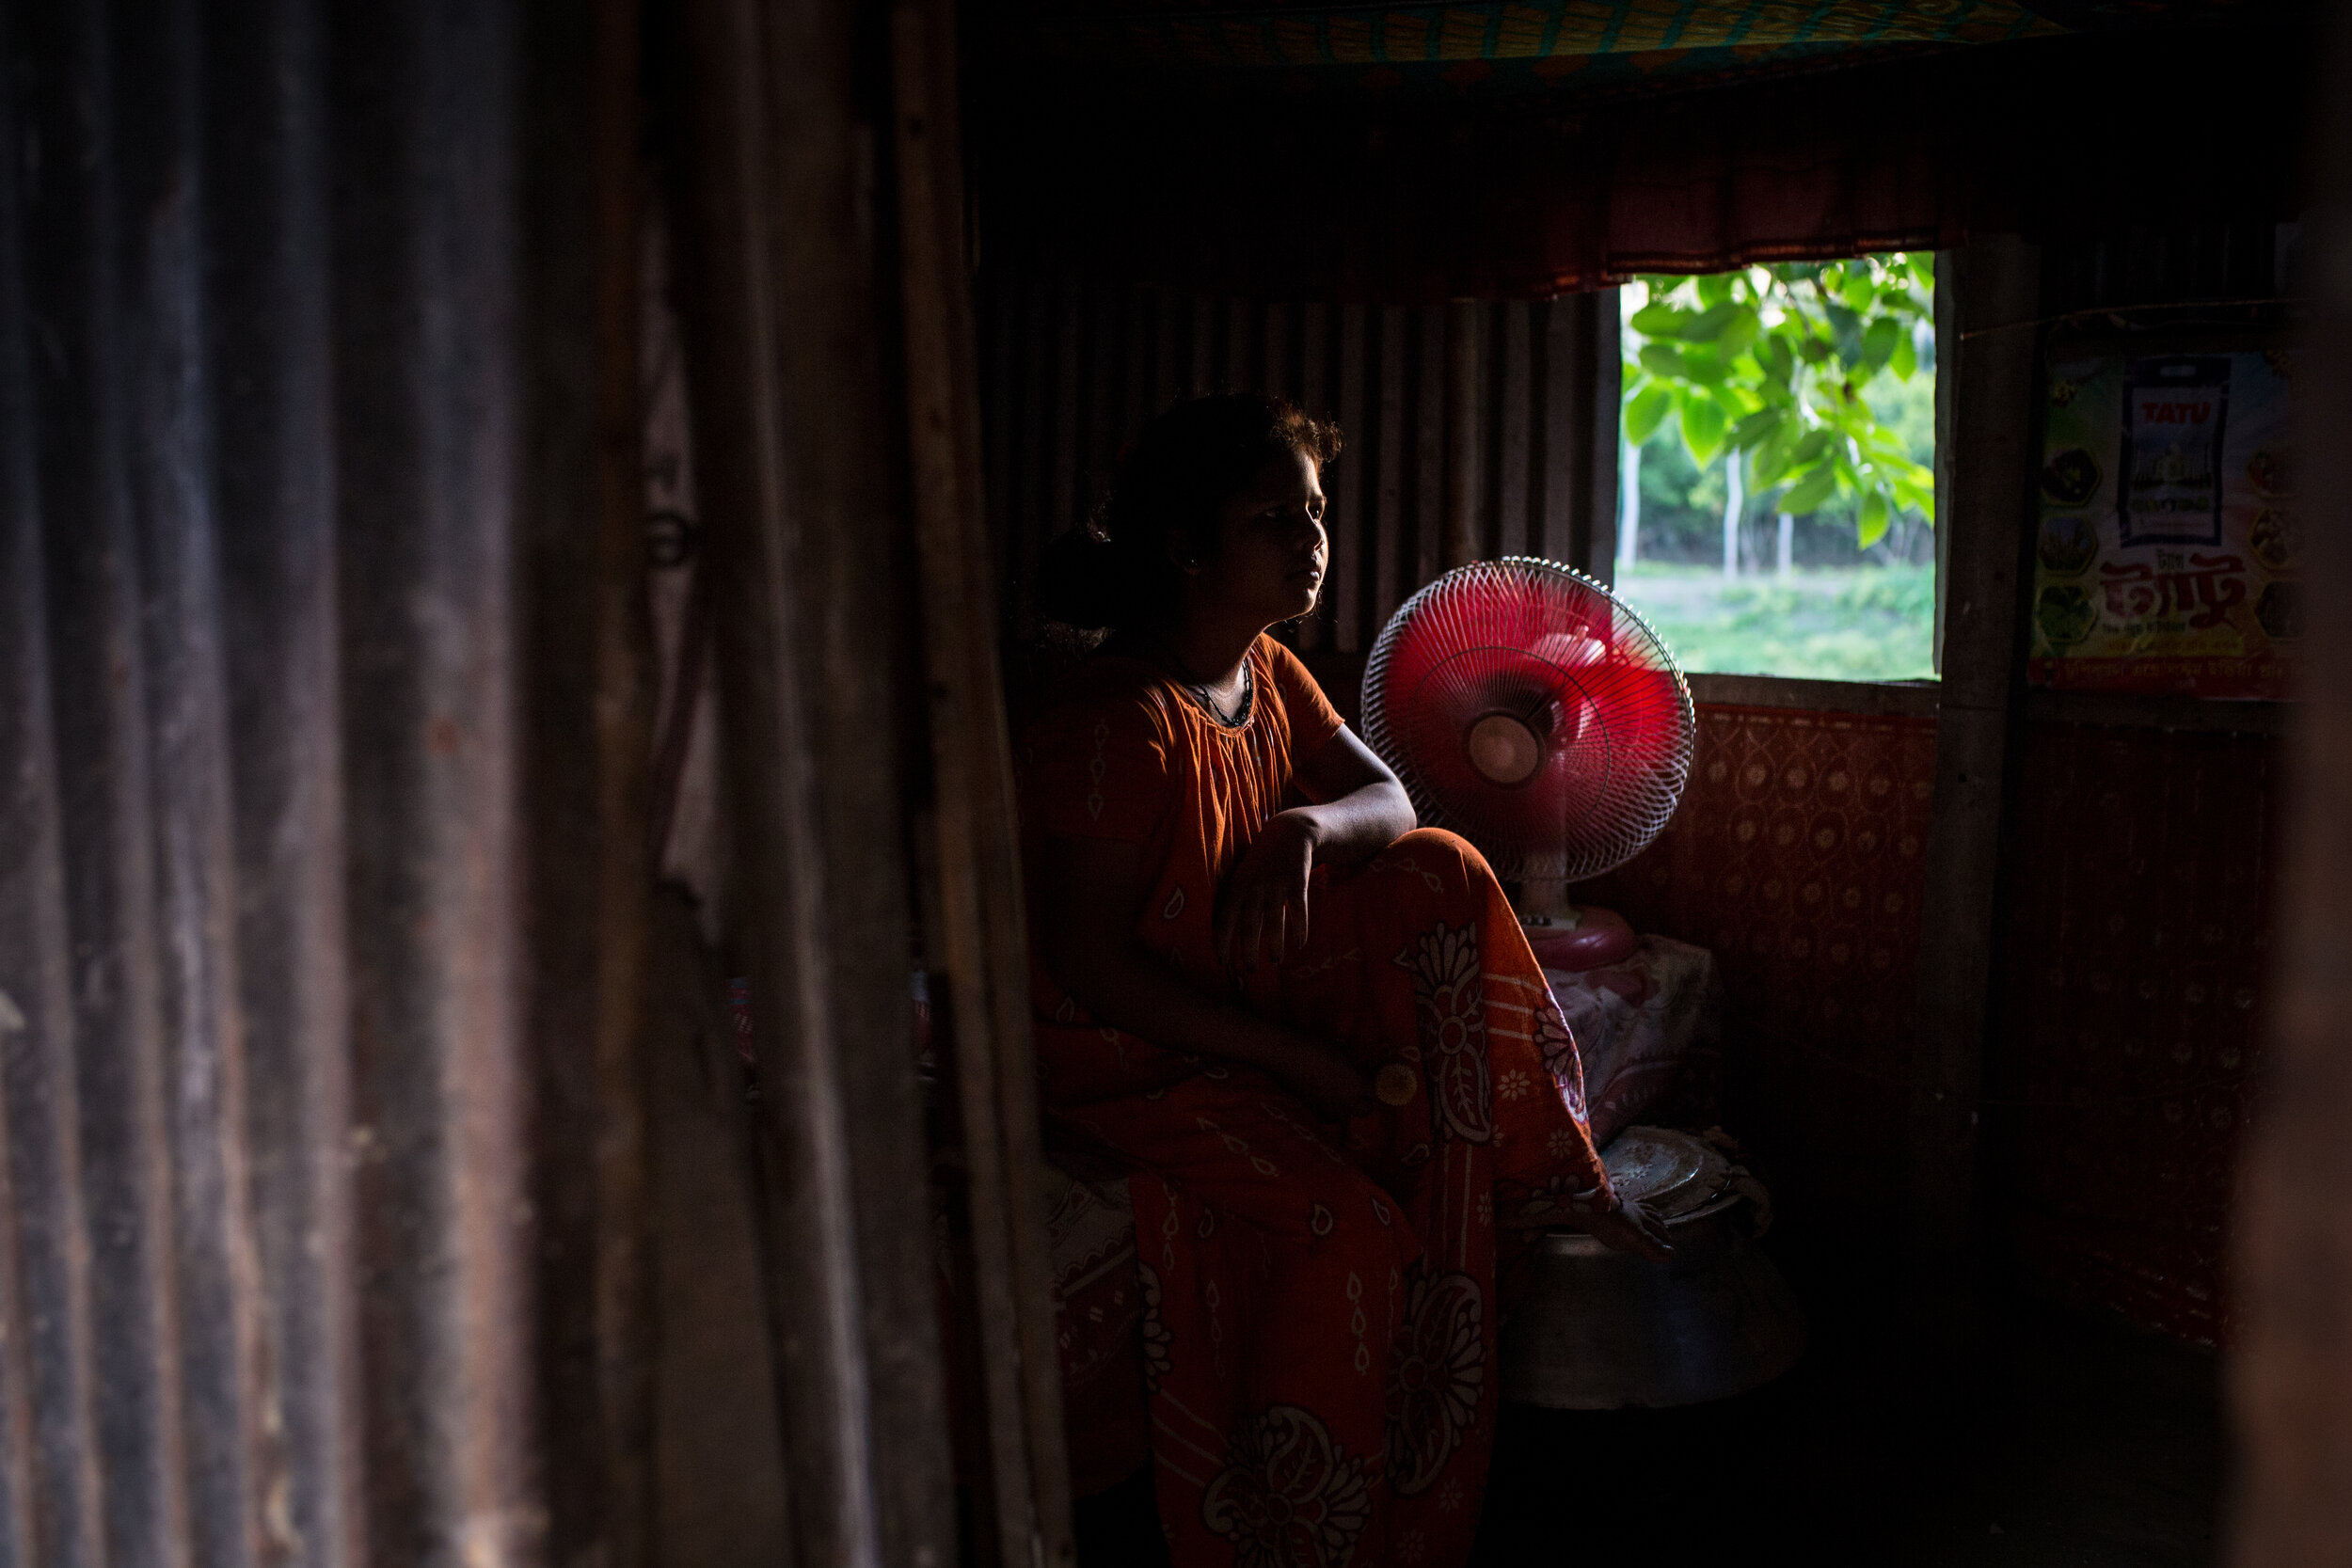  Bashita's* daughter watched TV at their hut in West Bengal, India. She was promised 5 lakh rupees (six thousand euros), but is yet to receive the money because the recipient died.    *name changed 